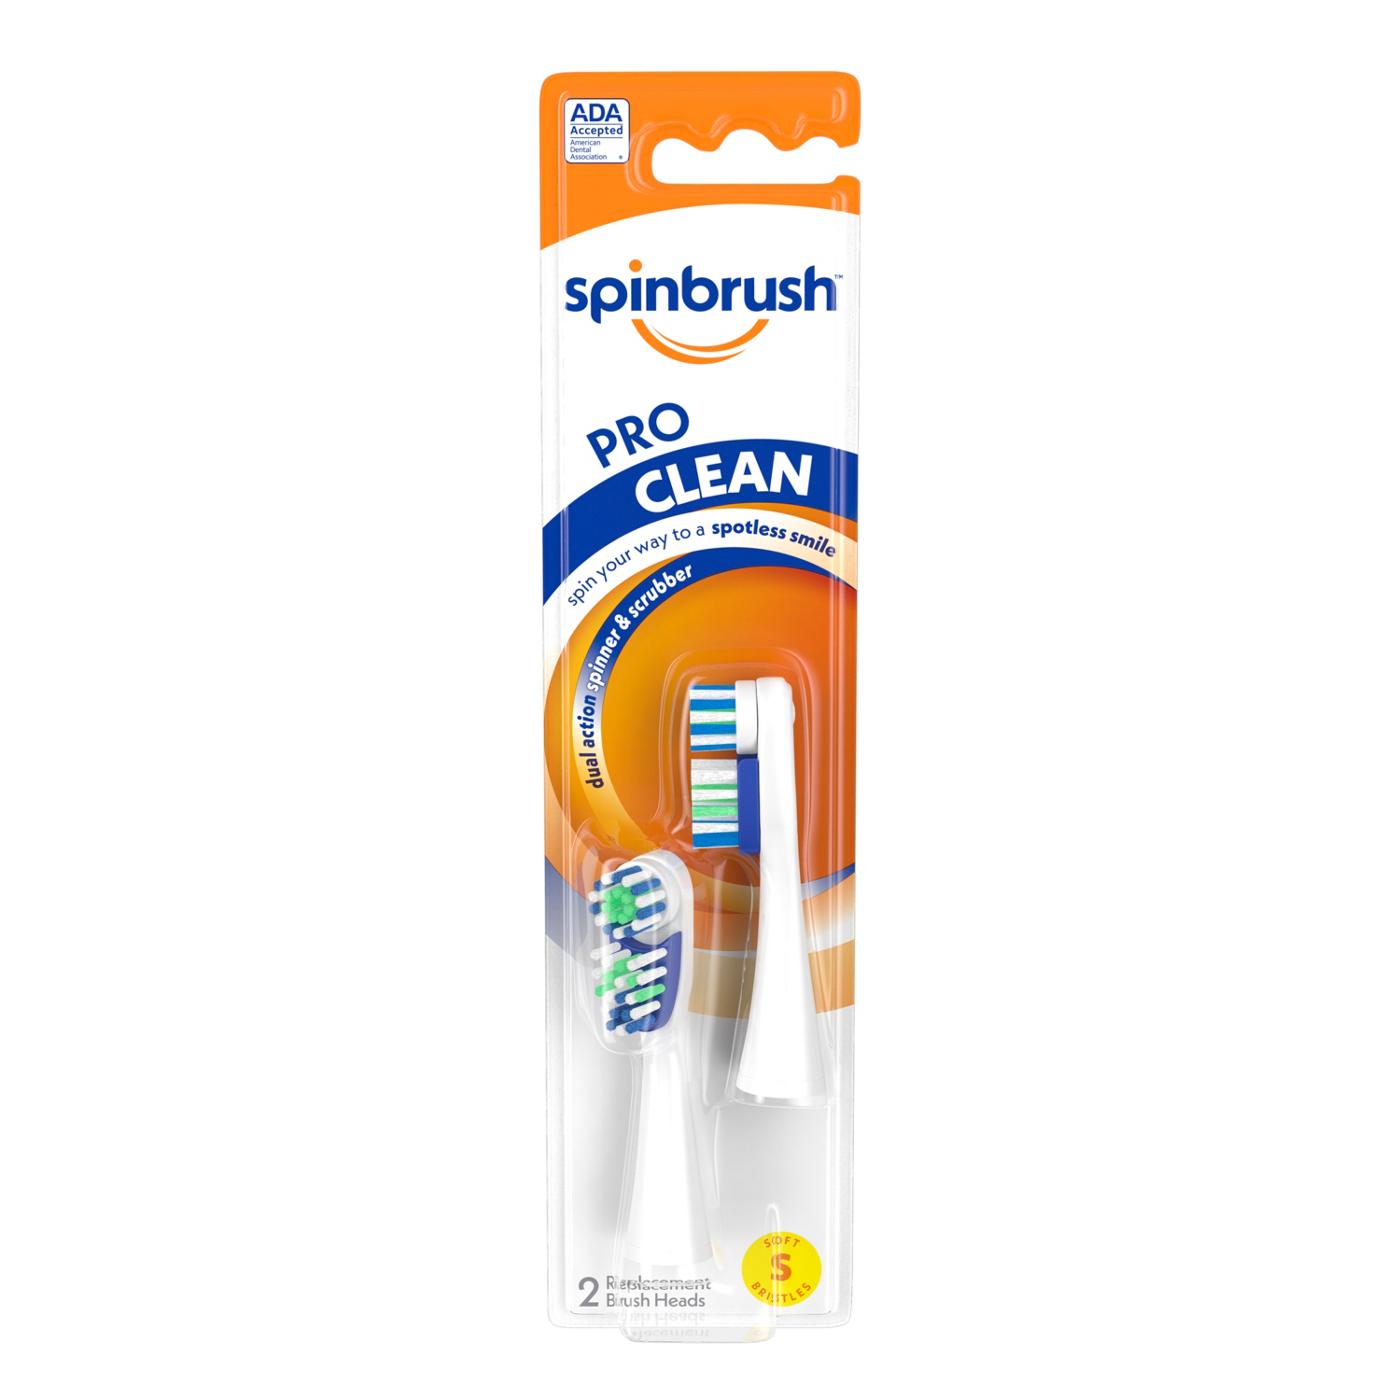 Arm & Hammer Spinbrush Pro Clean Replacement Brush Heads - Soft; image 1 of 2